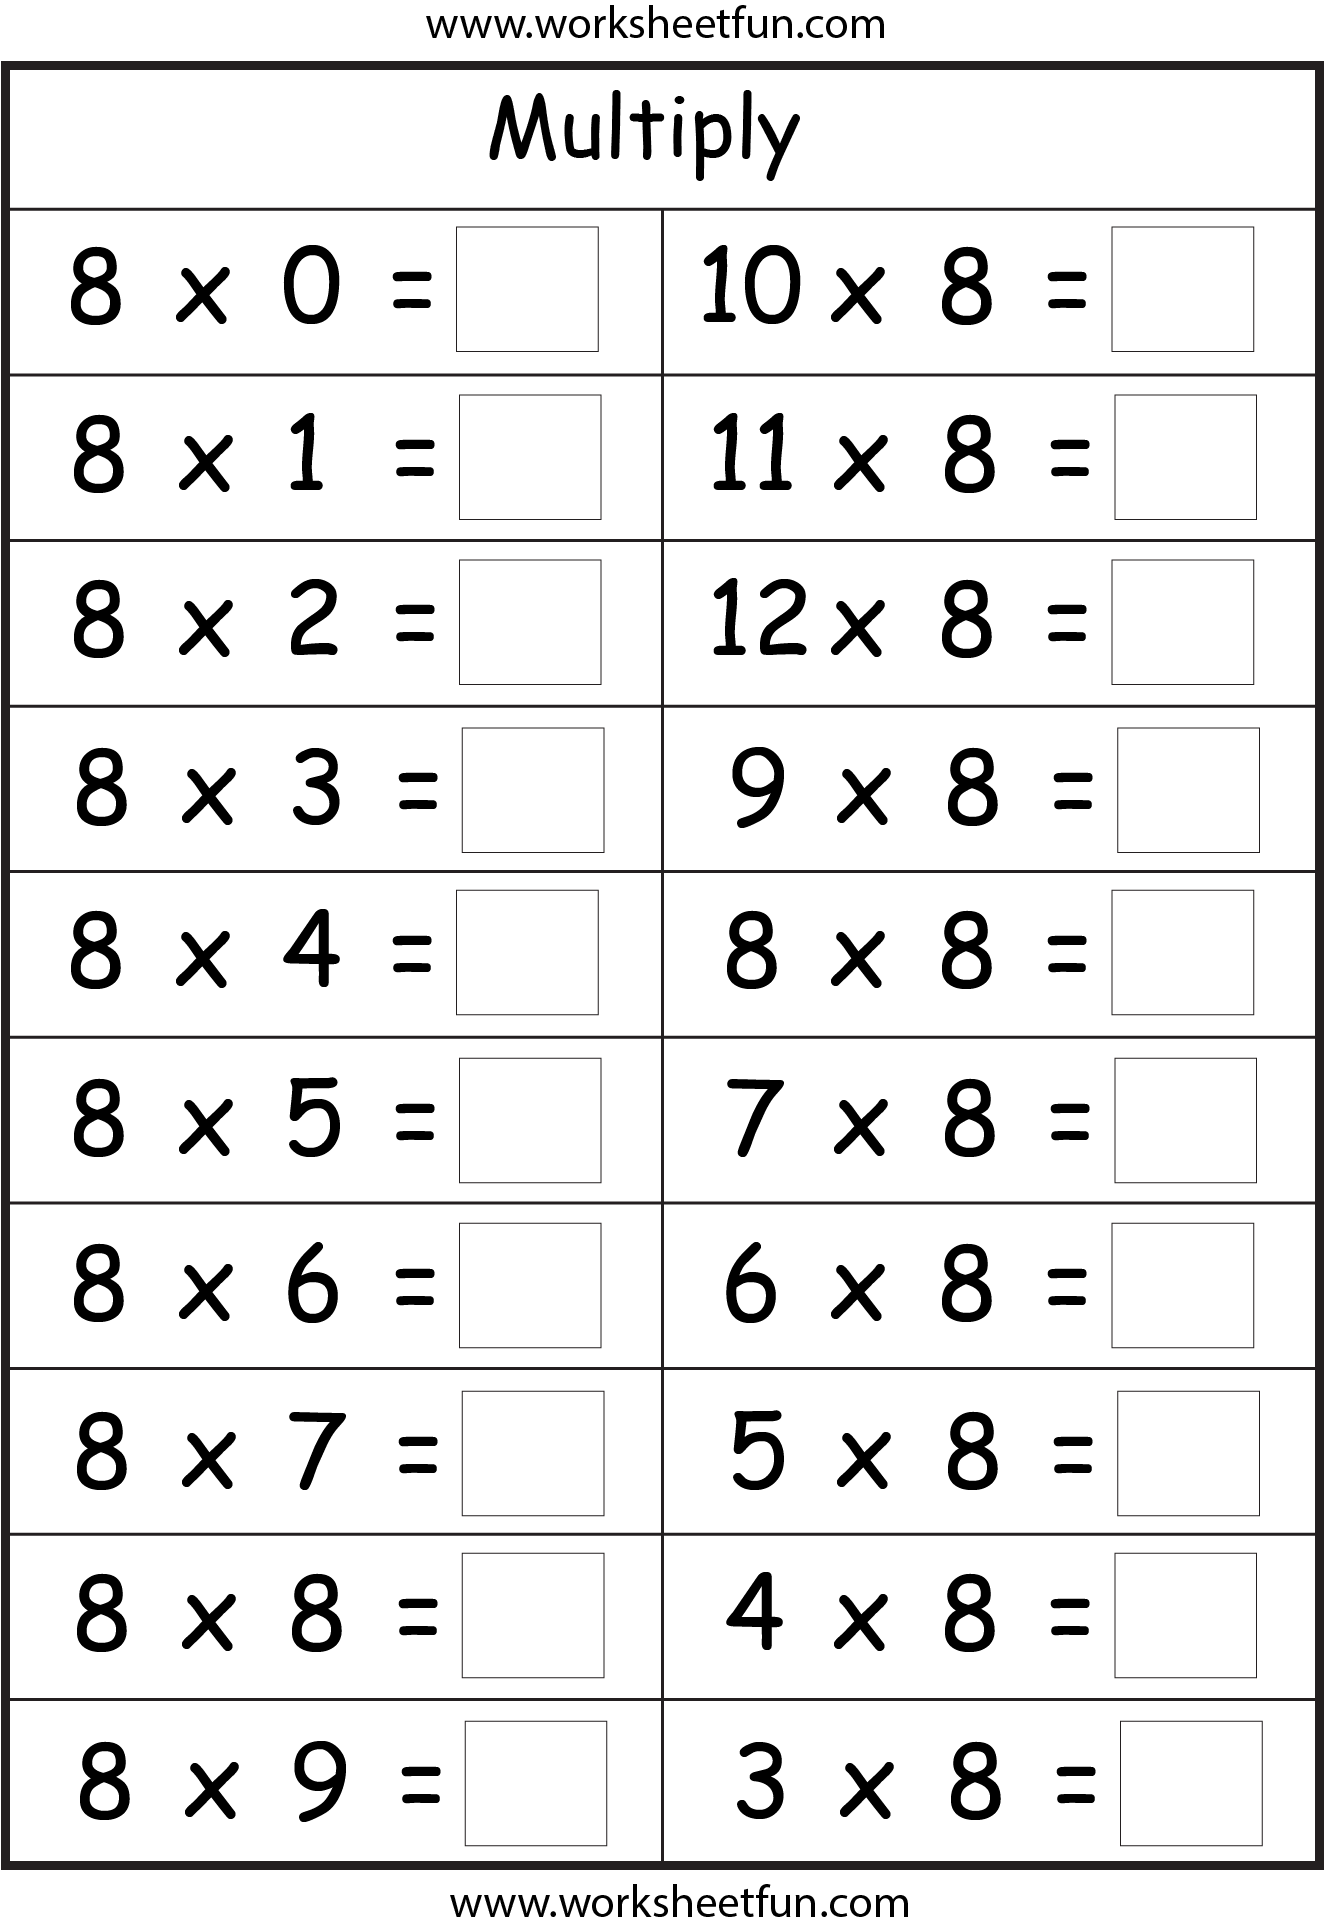 multiplication-basic-facts-2-3-4-5-6-7-8-9-times-tables-eight-worksheets-free